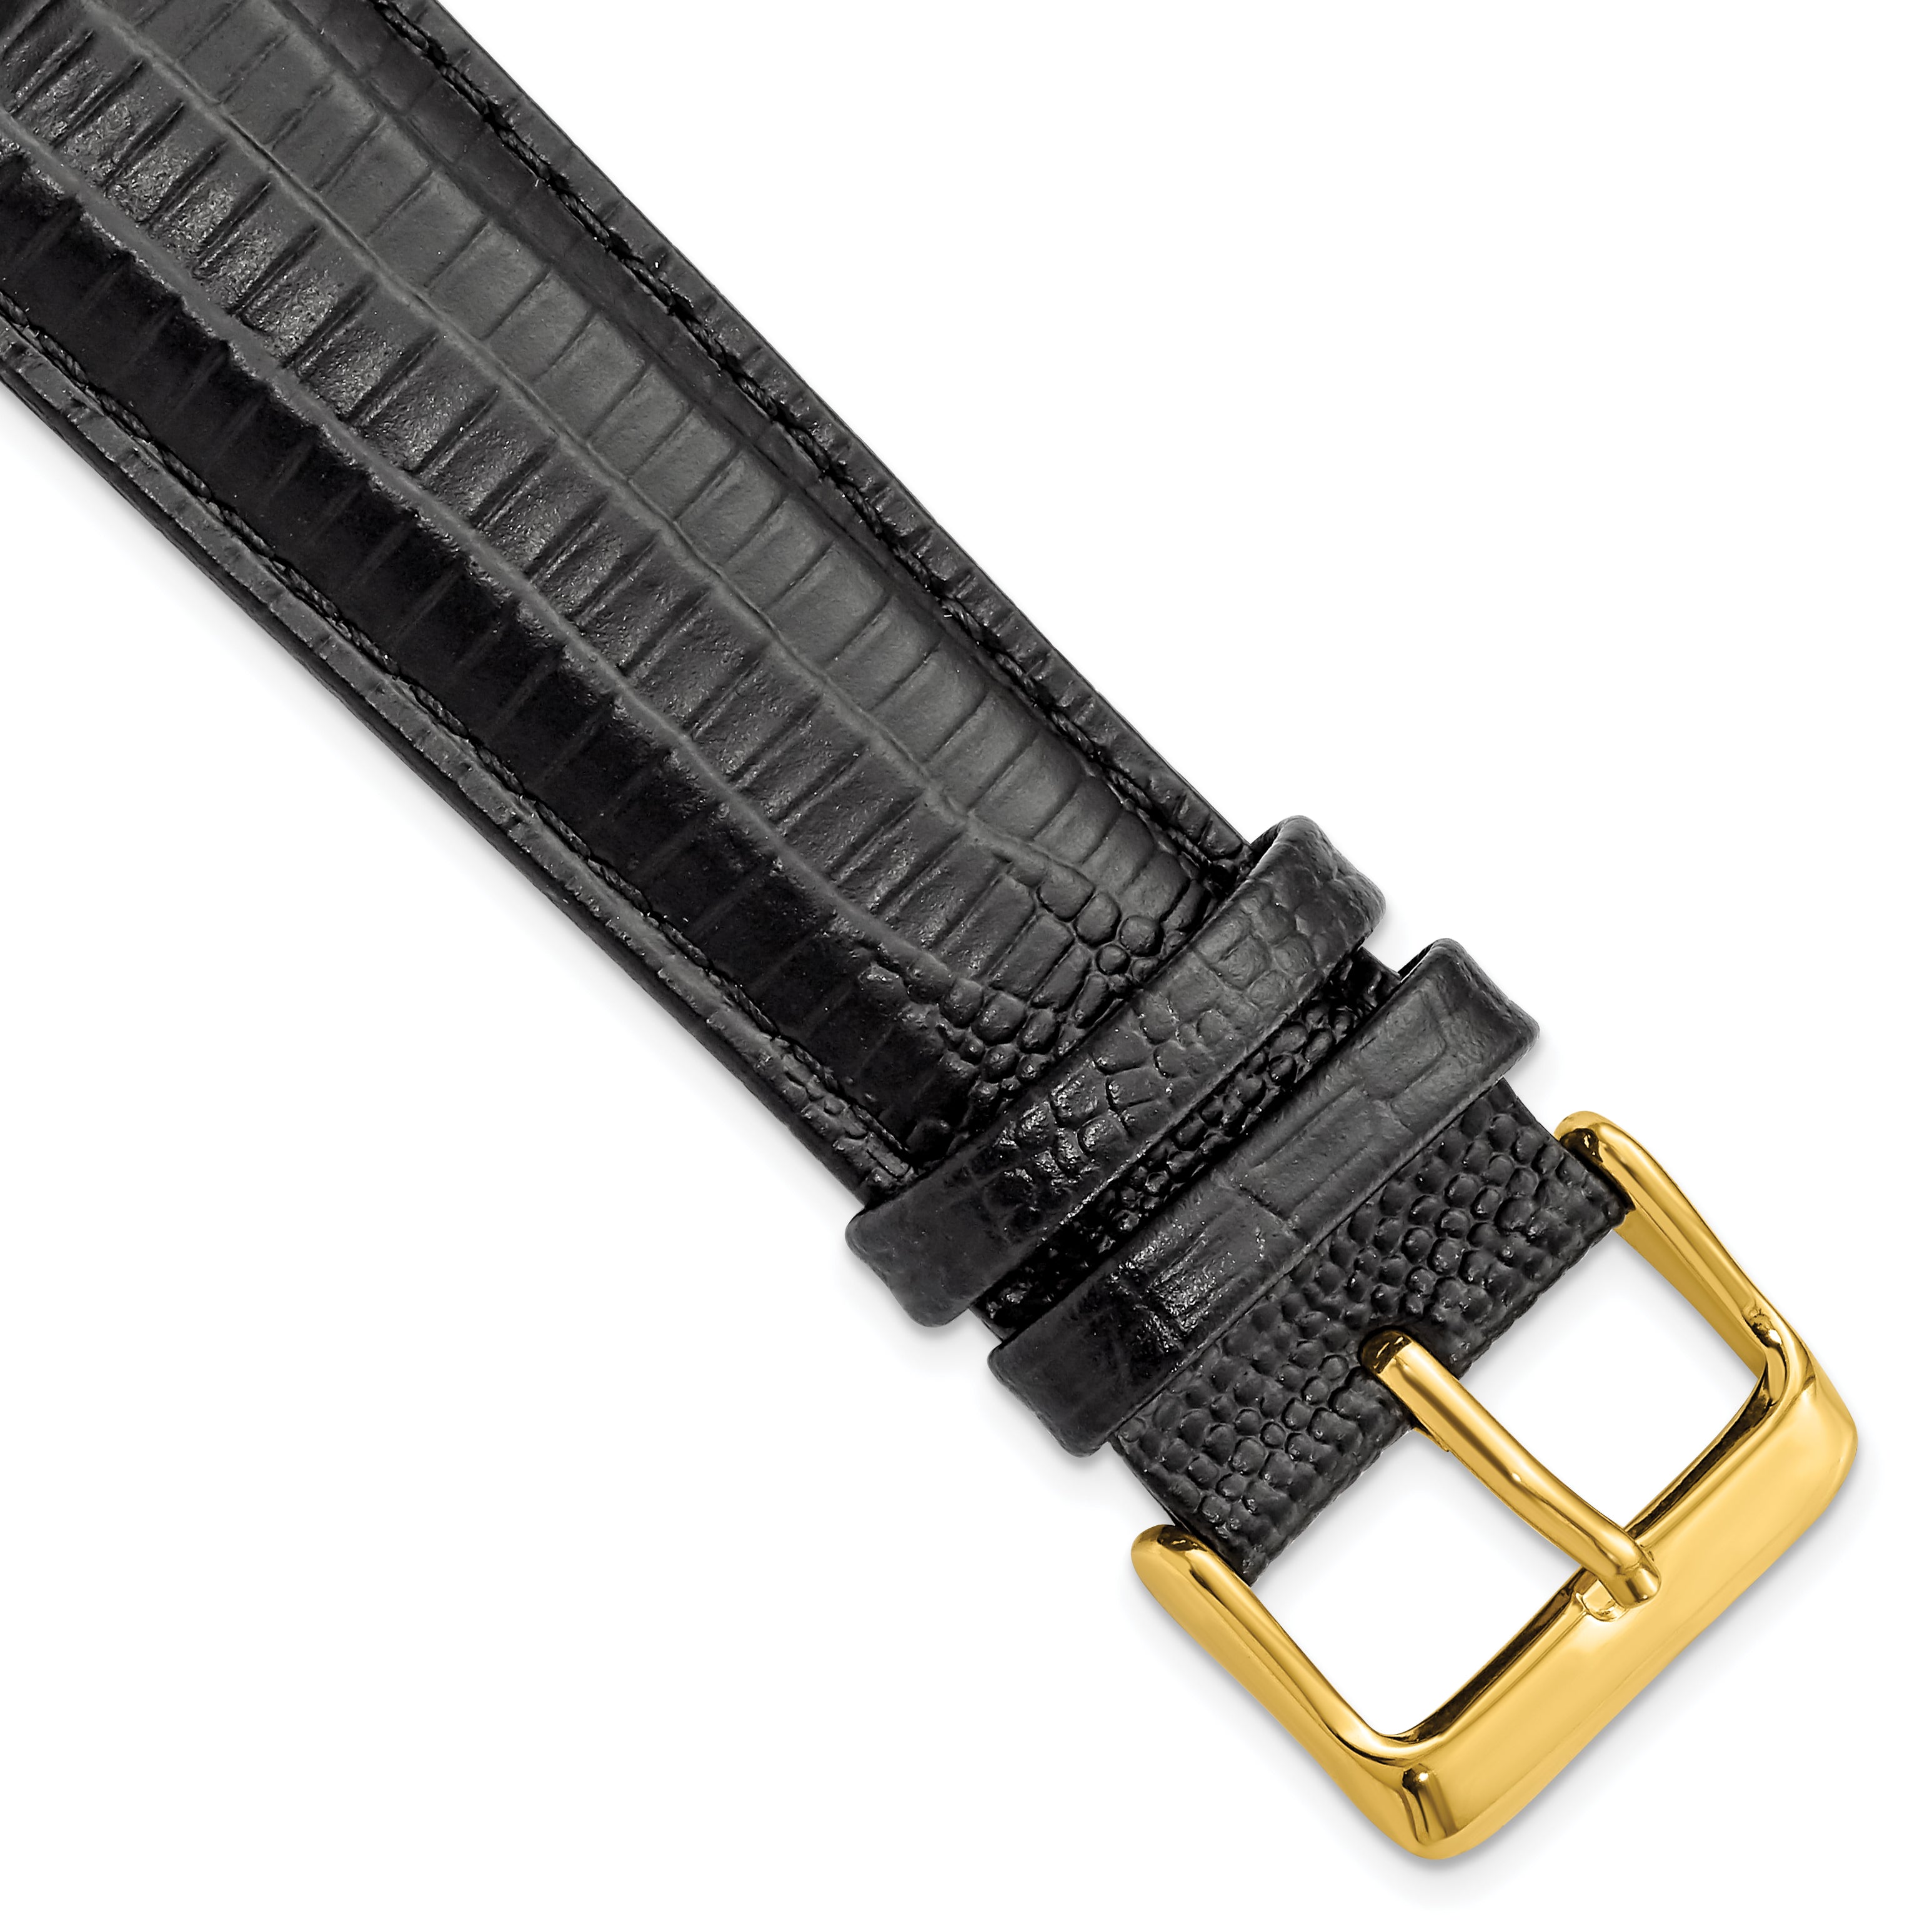 DeBeer 22mm Black Teju Liz Grain Leather with Gold-tone Buckle 7.5 inch Watch Band